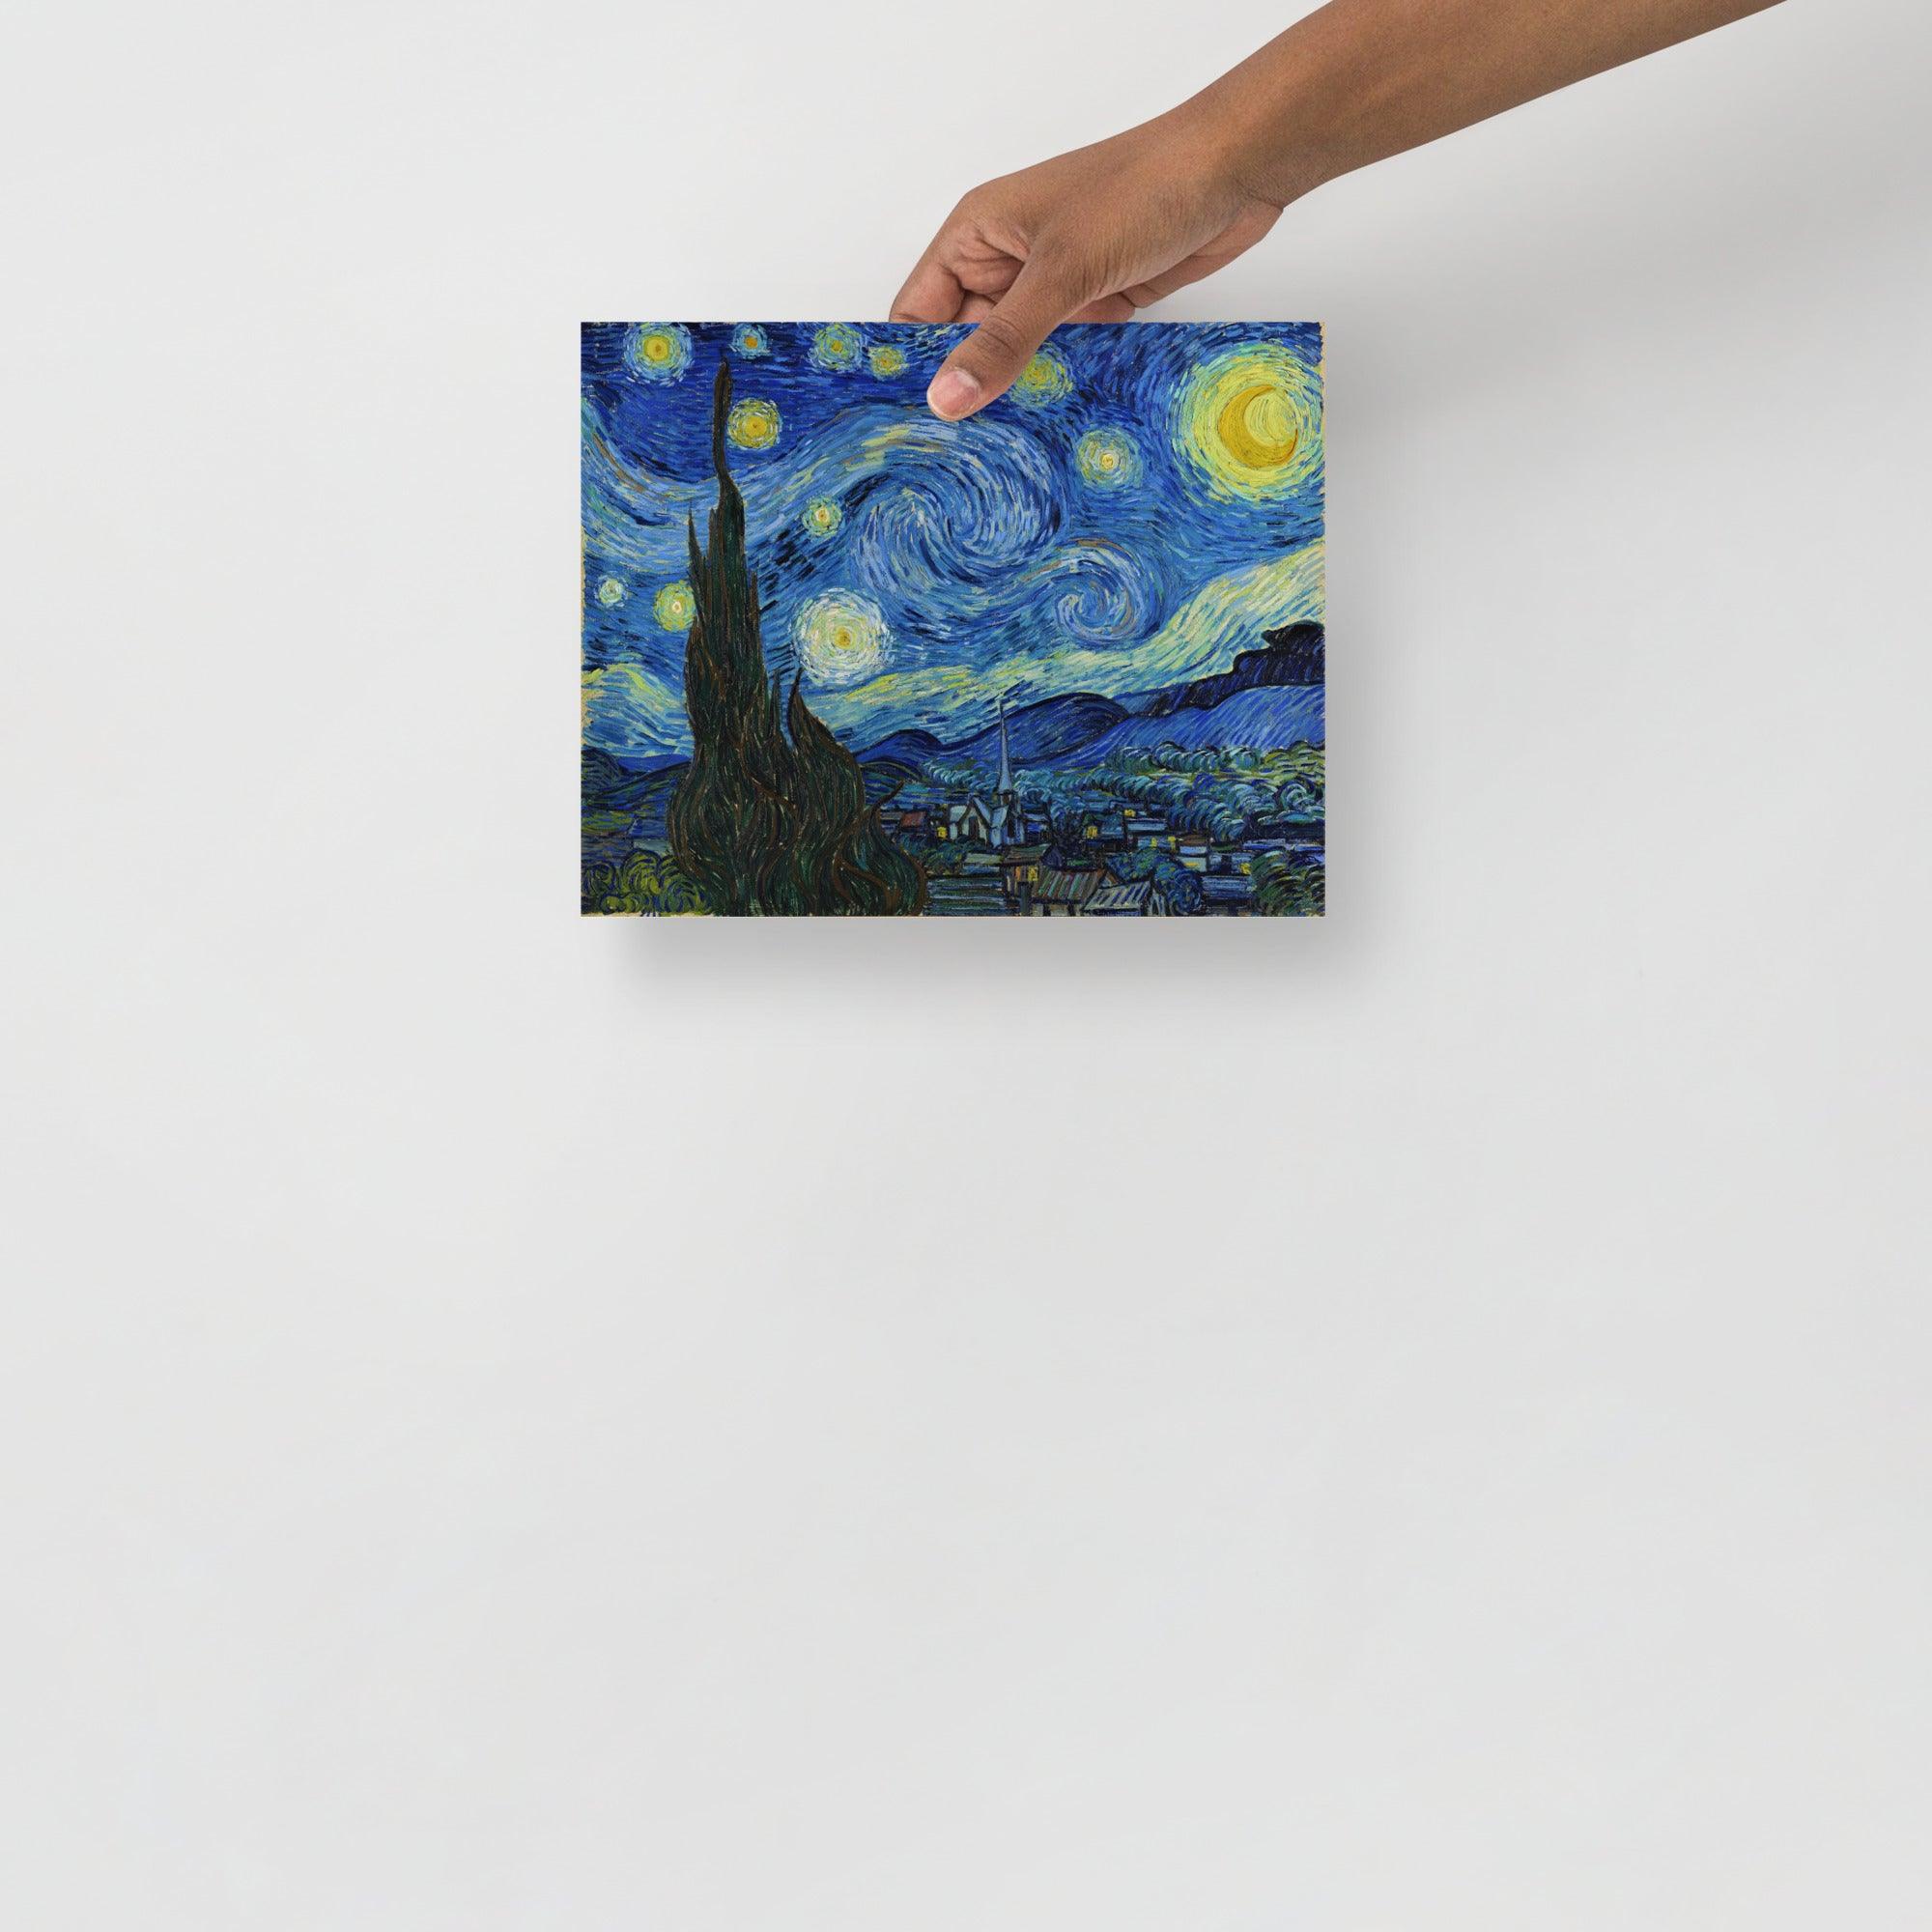 A The Starry Night by Vincent van Gogh poster on a plain backdrop in size 8x10”.